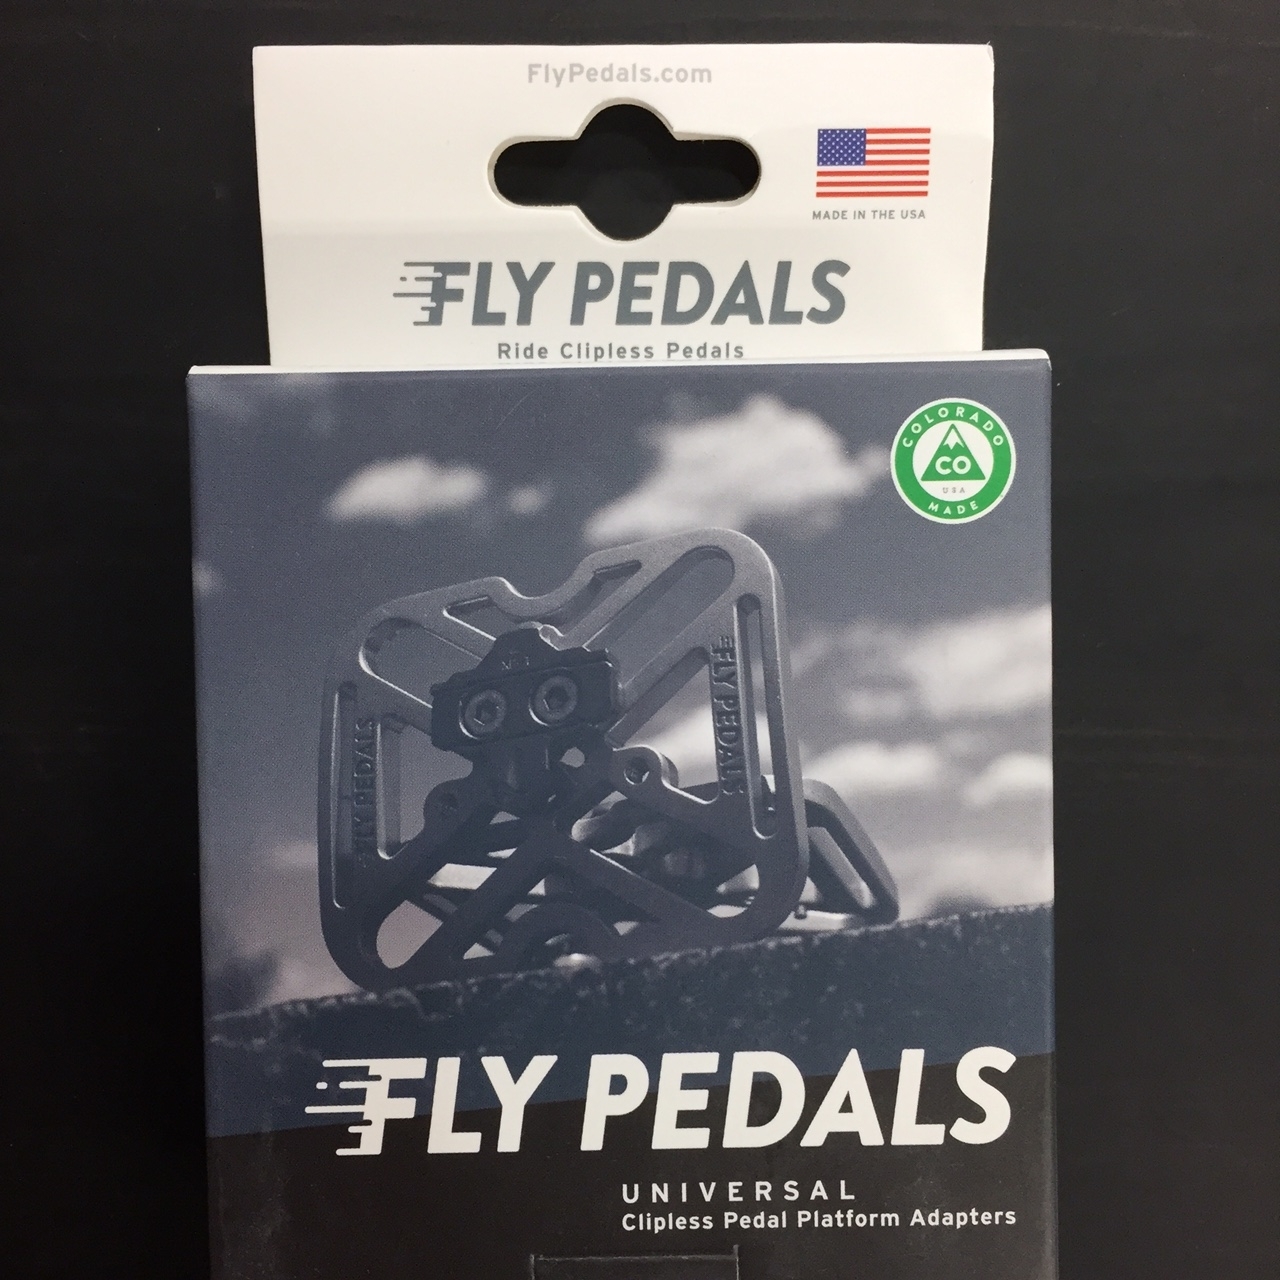 FLYPEDALS-1.jpg